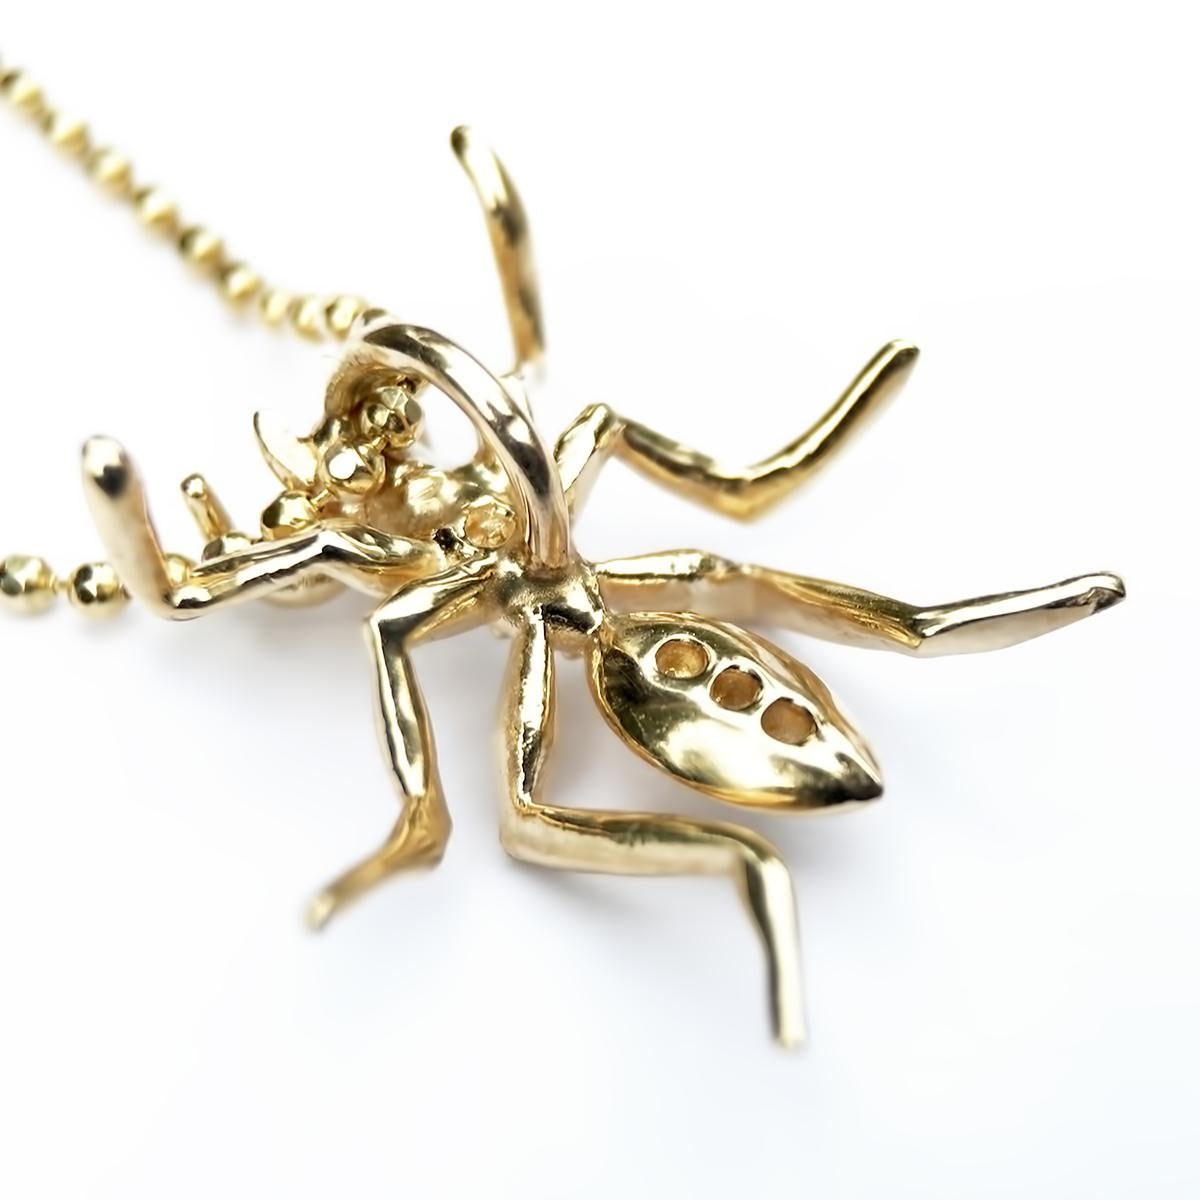 The AT401PD YG pendant is a limited edition jewelry piece that will make you feel like royalty. Made of 14k yellow gold, this pendant features a stunning ant design that symbolizes the power and strength of a queen ruling her colony. With five